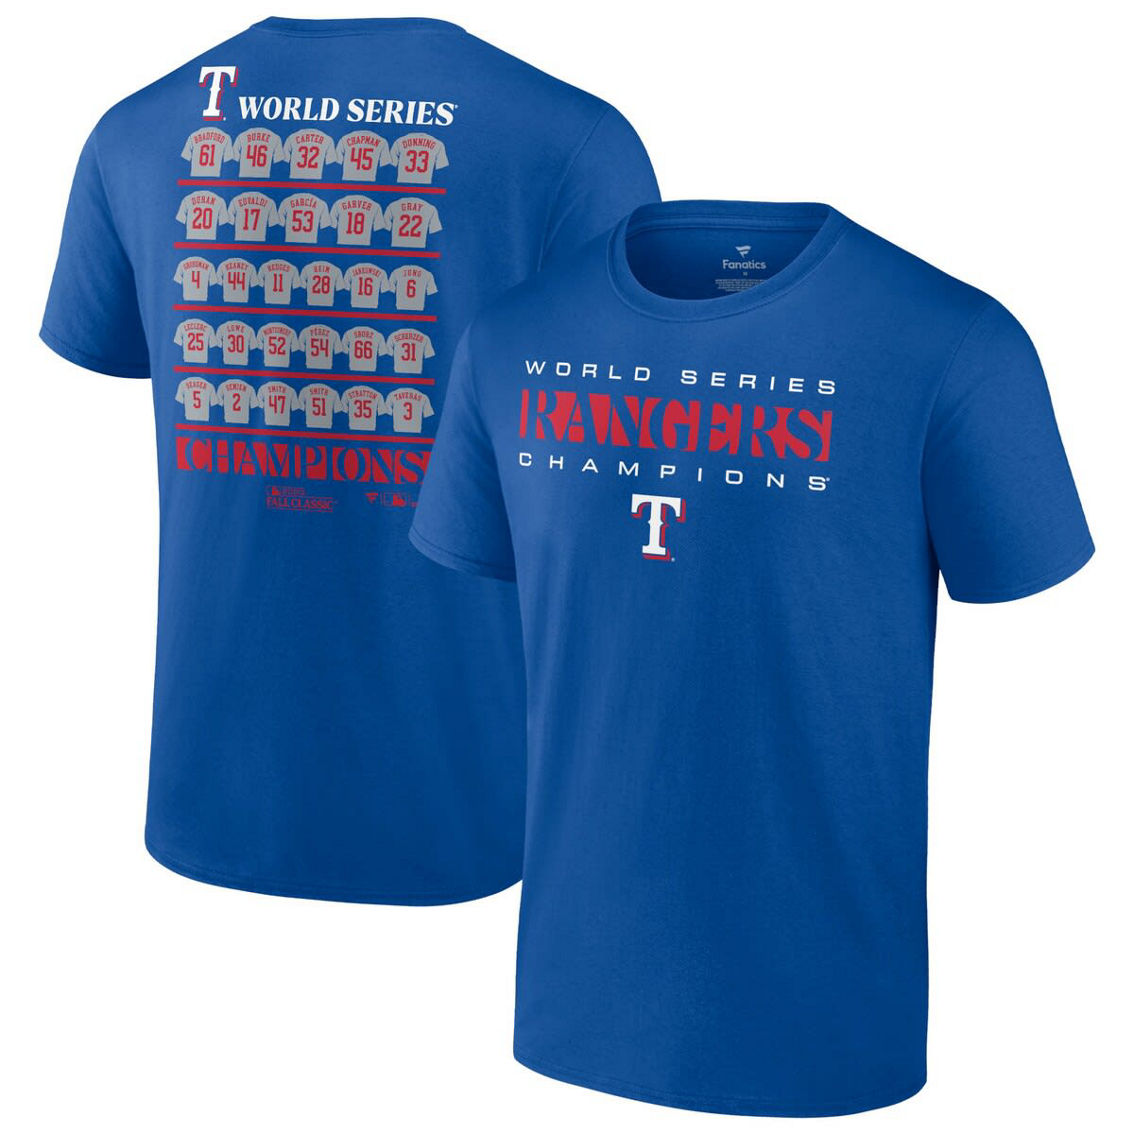 Men's Royal Texas Rangers 2023 World Series Champions Jersey Roster T-Shirt - Image 2 of 4